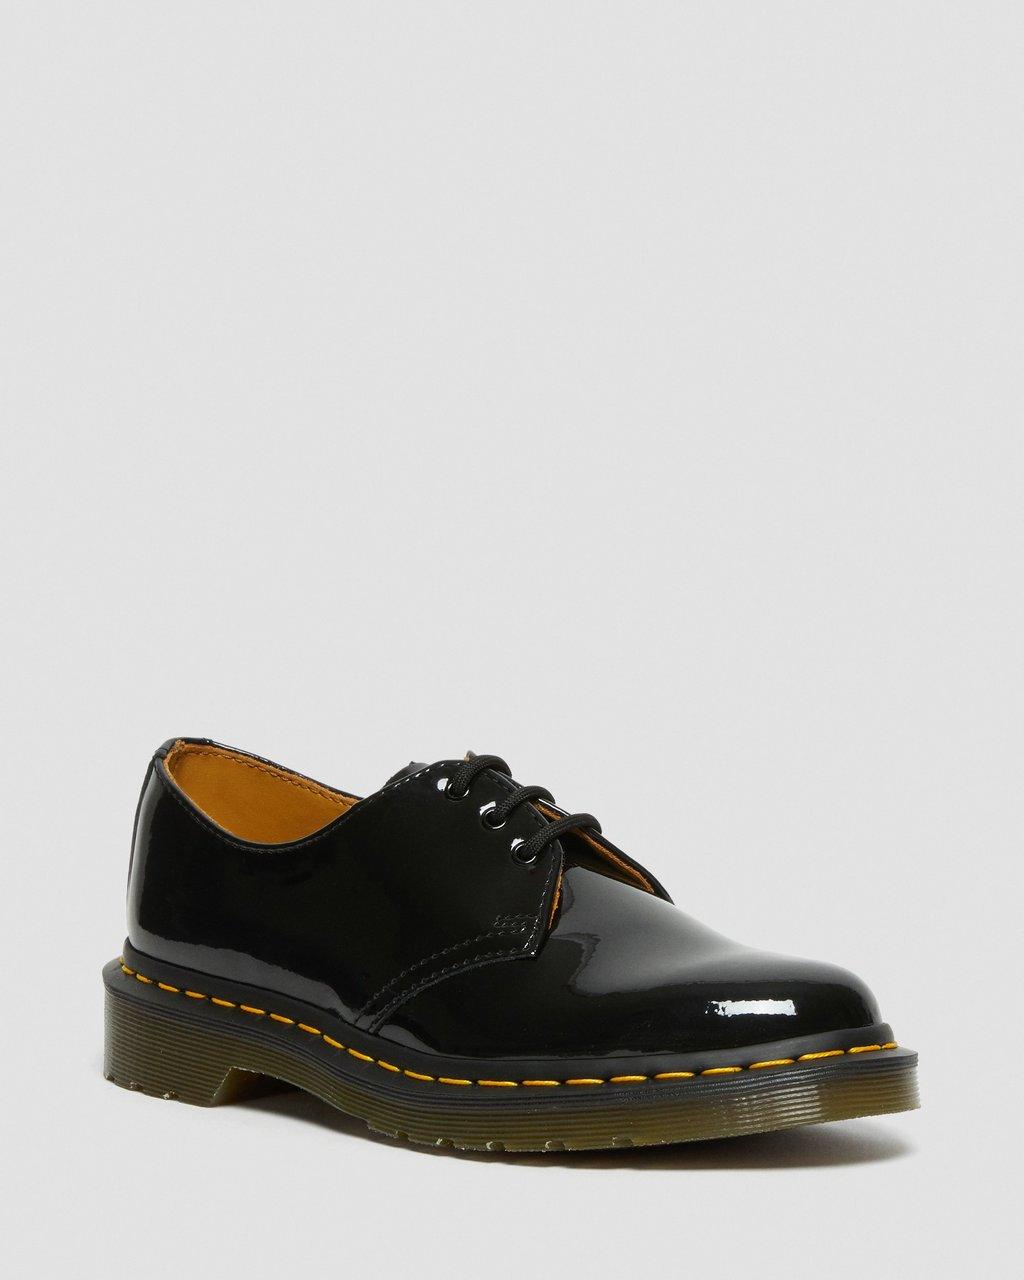 Dr. Martens + 1461 Women’s Patent Leather Oxford Shoes